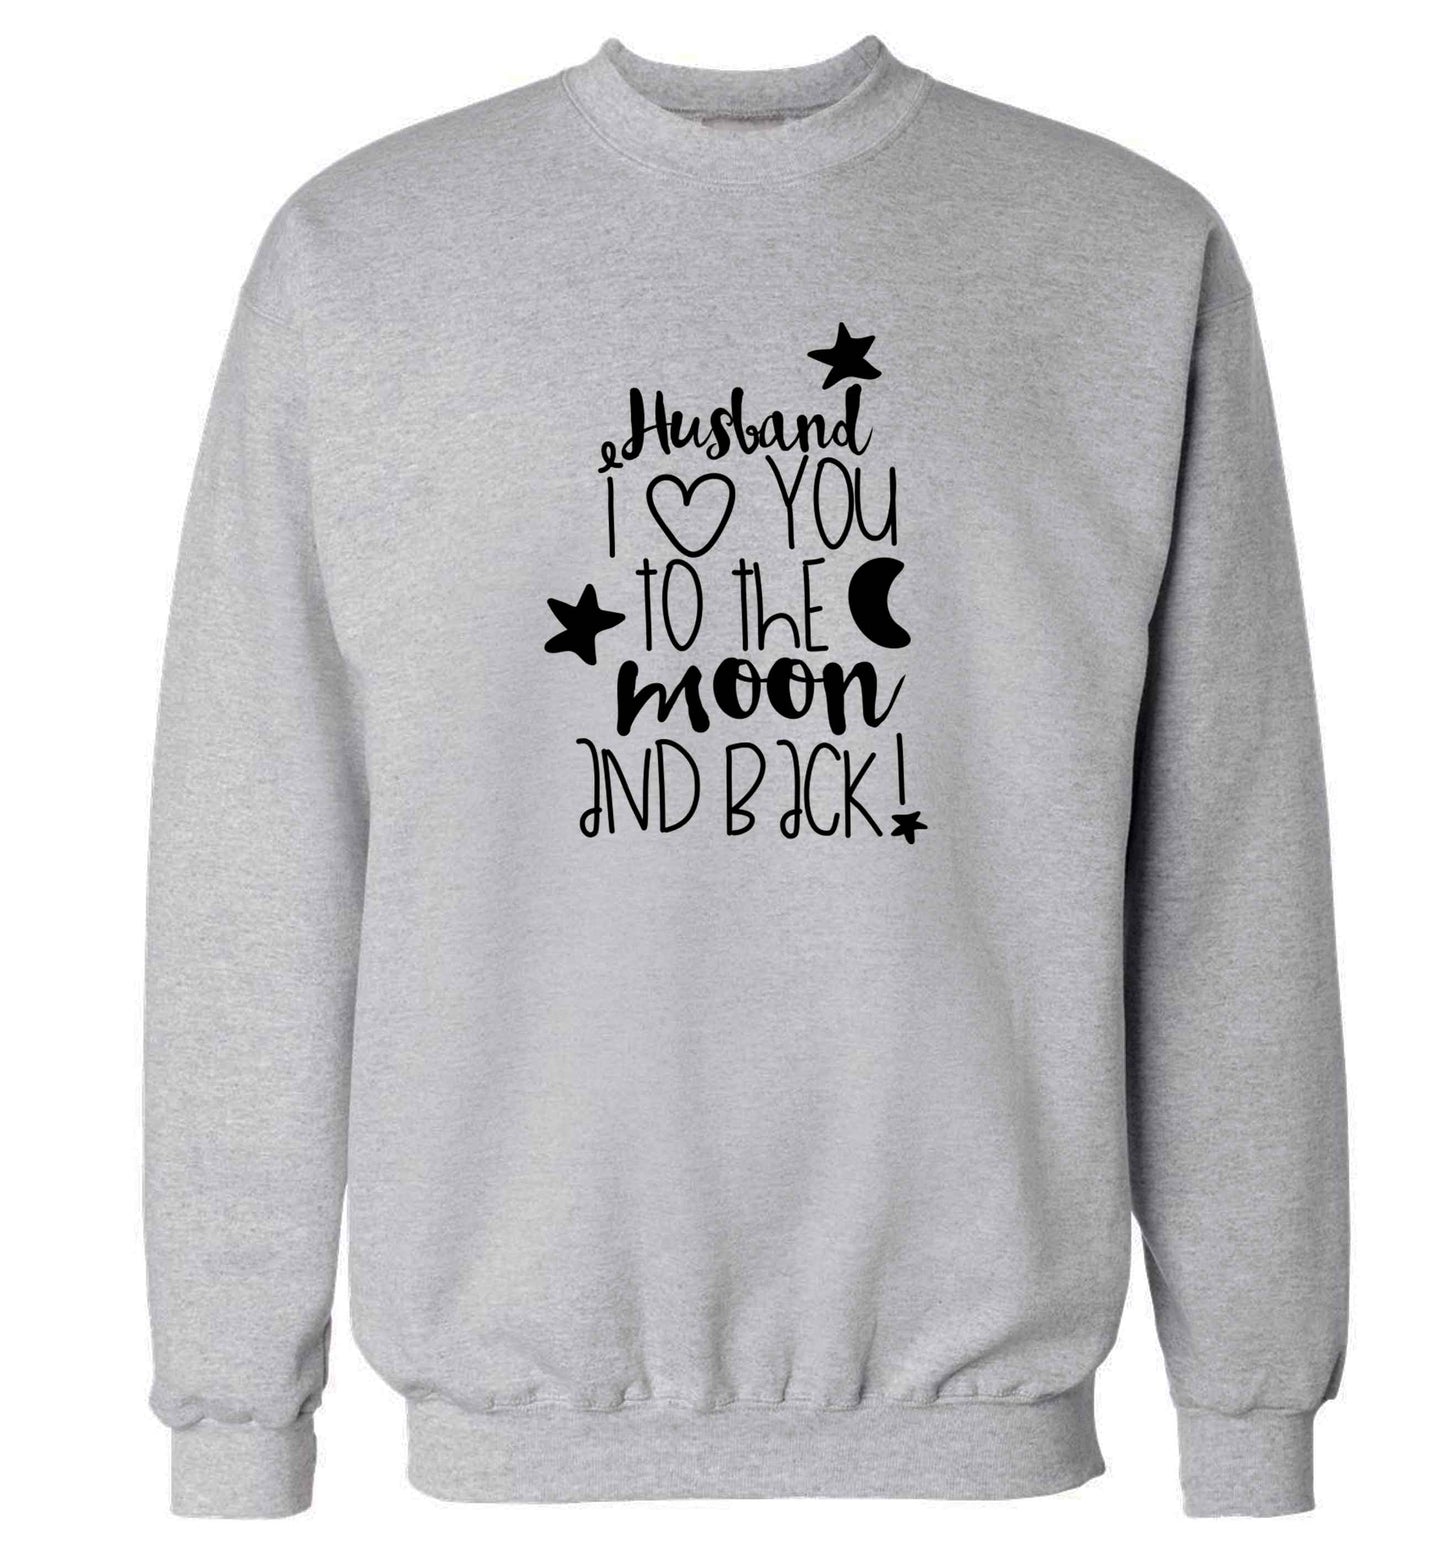 Husband I love you to the moon and back adult's unisex grey sweater 2XL